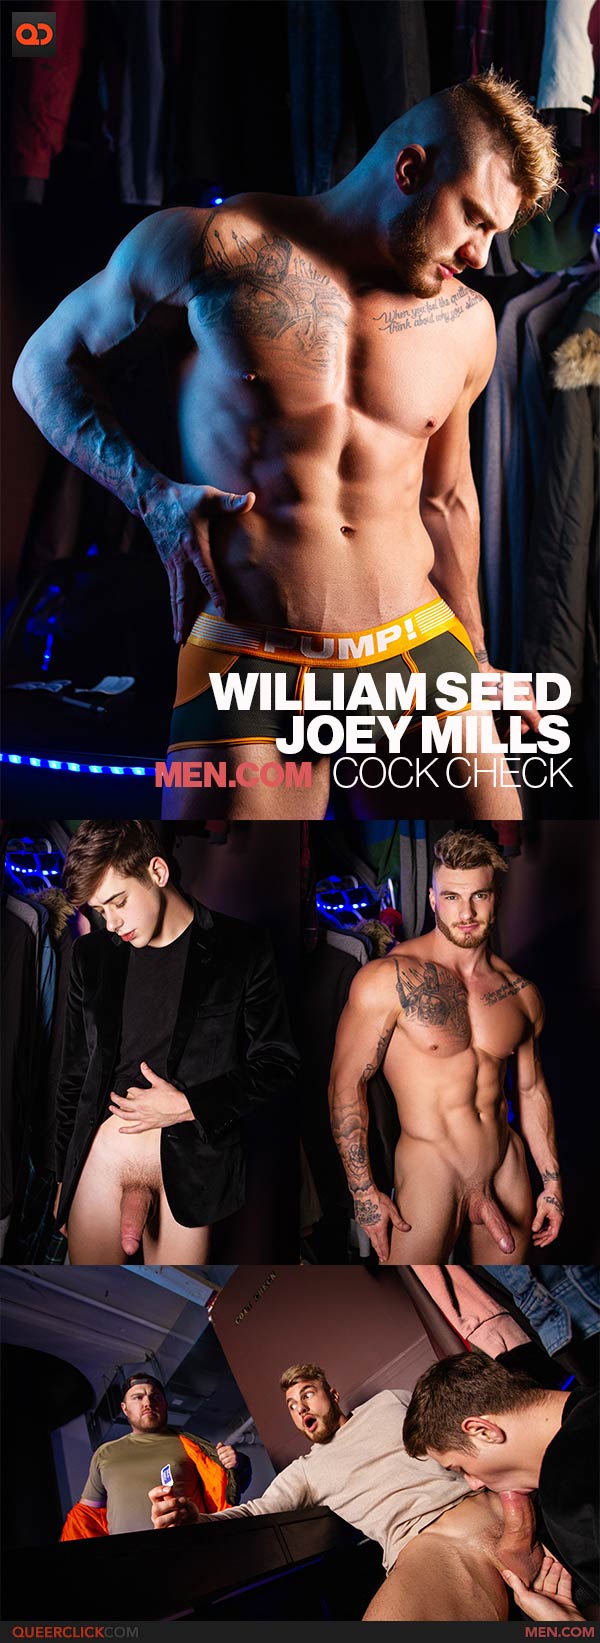 Men.com: William Seed and Joey Mills